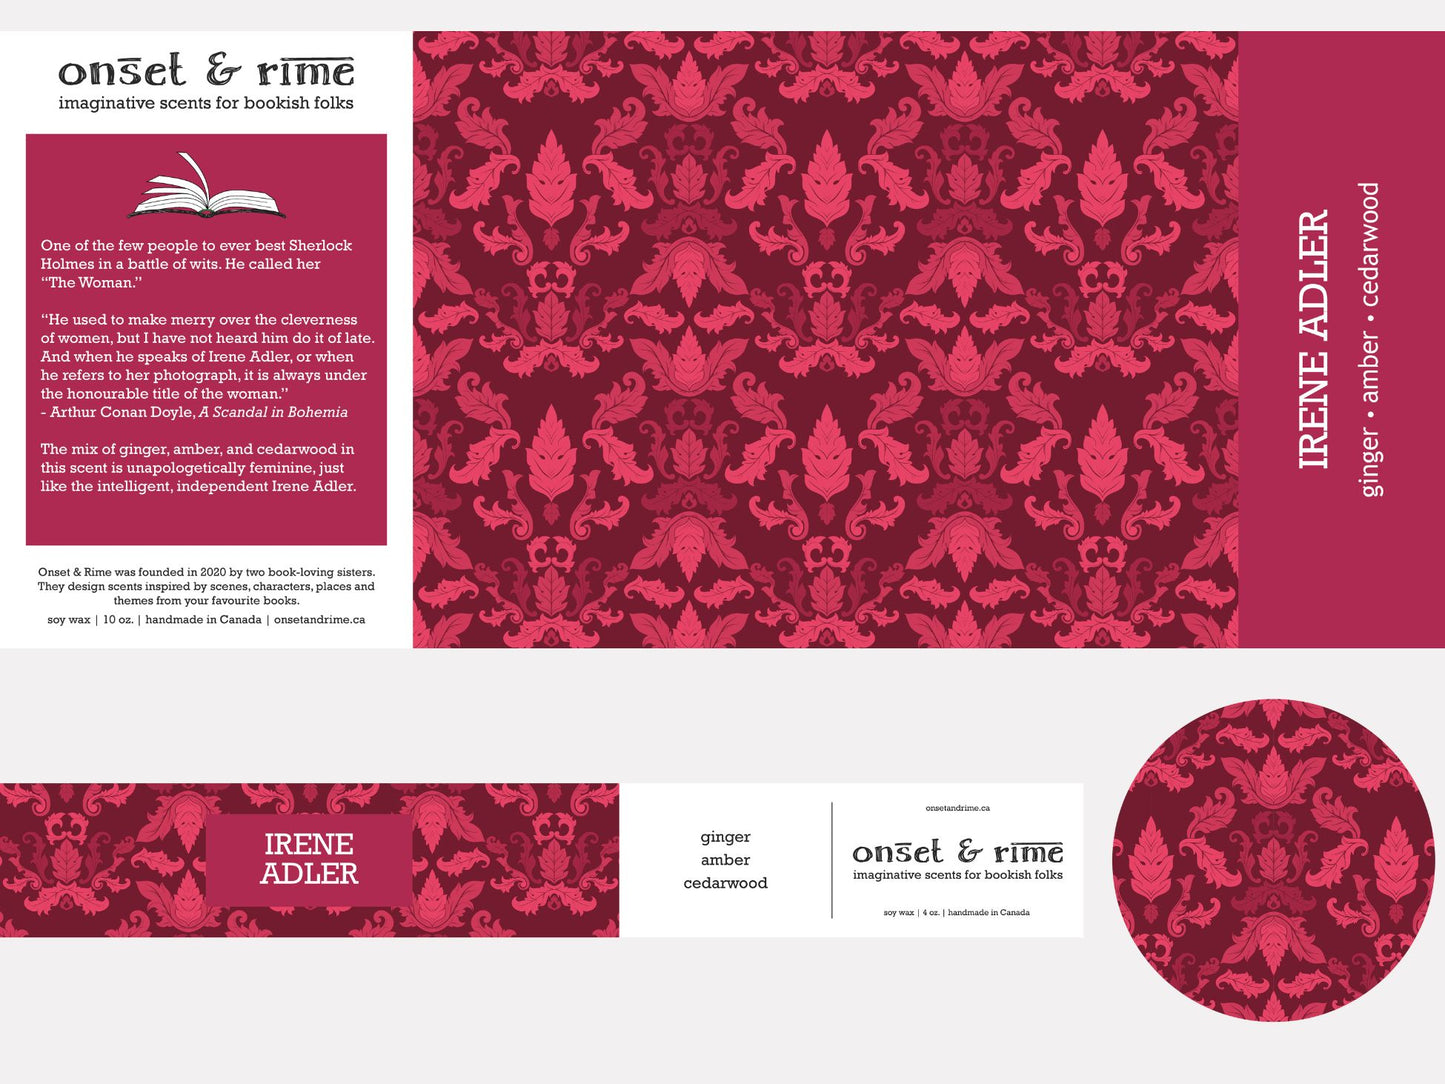 A close up view of the label for the Onset & Rime ginger and amber scented candle called "Irene Adler". The label is a deep red Victorian pattern. The text on the label is "Irene Adler - Ginger, Amber, Cedarwood".